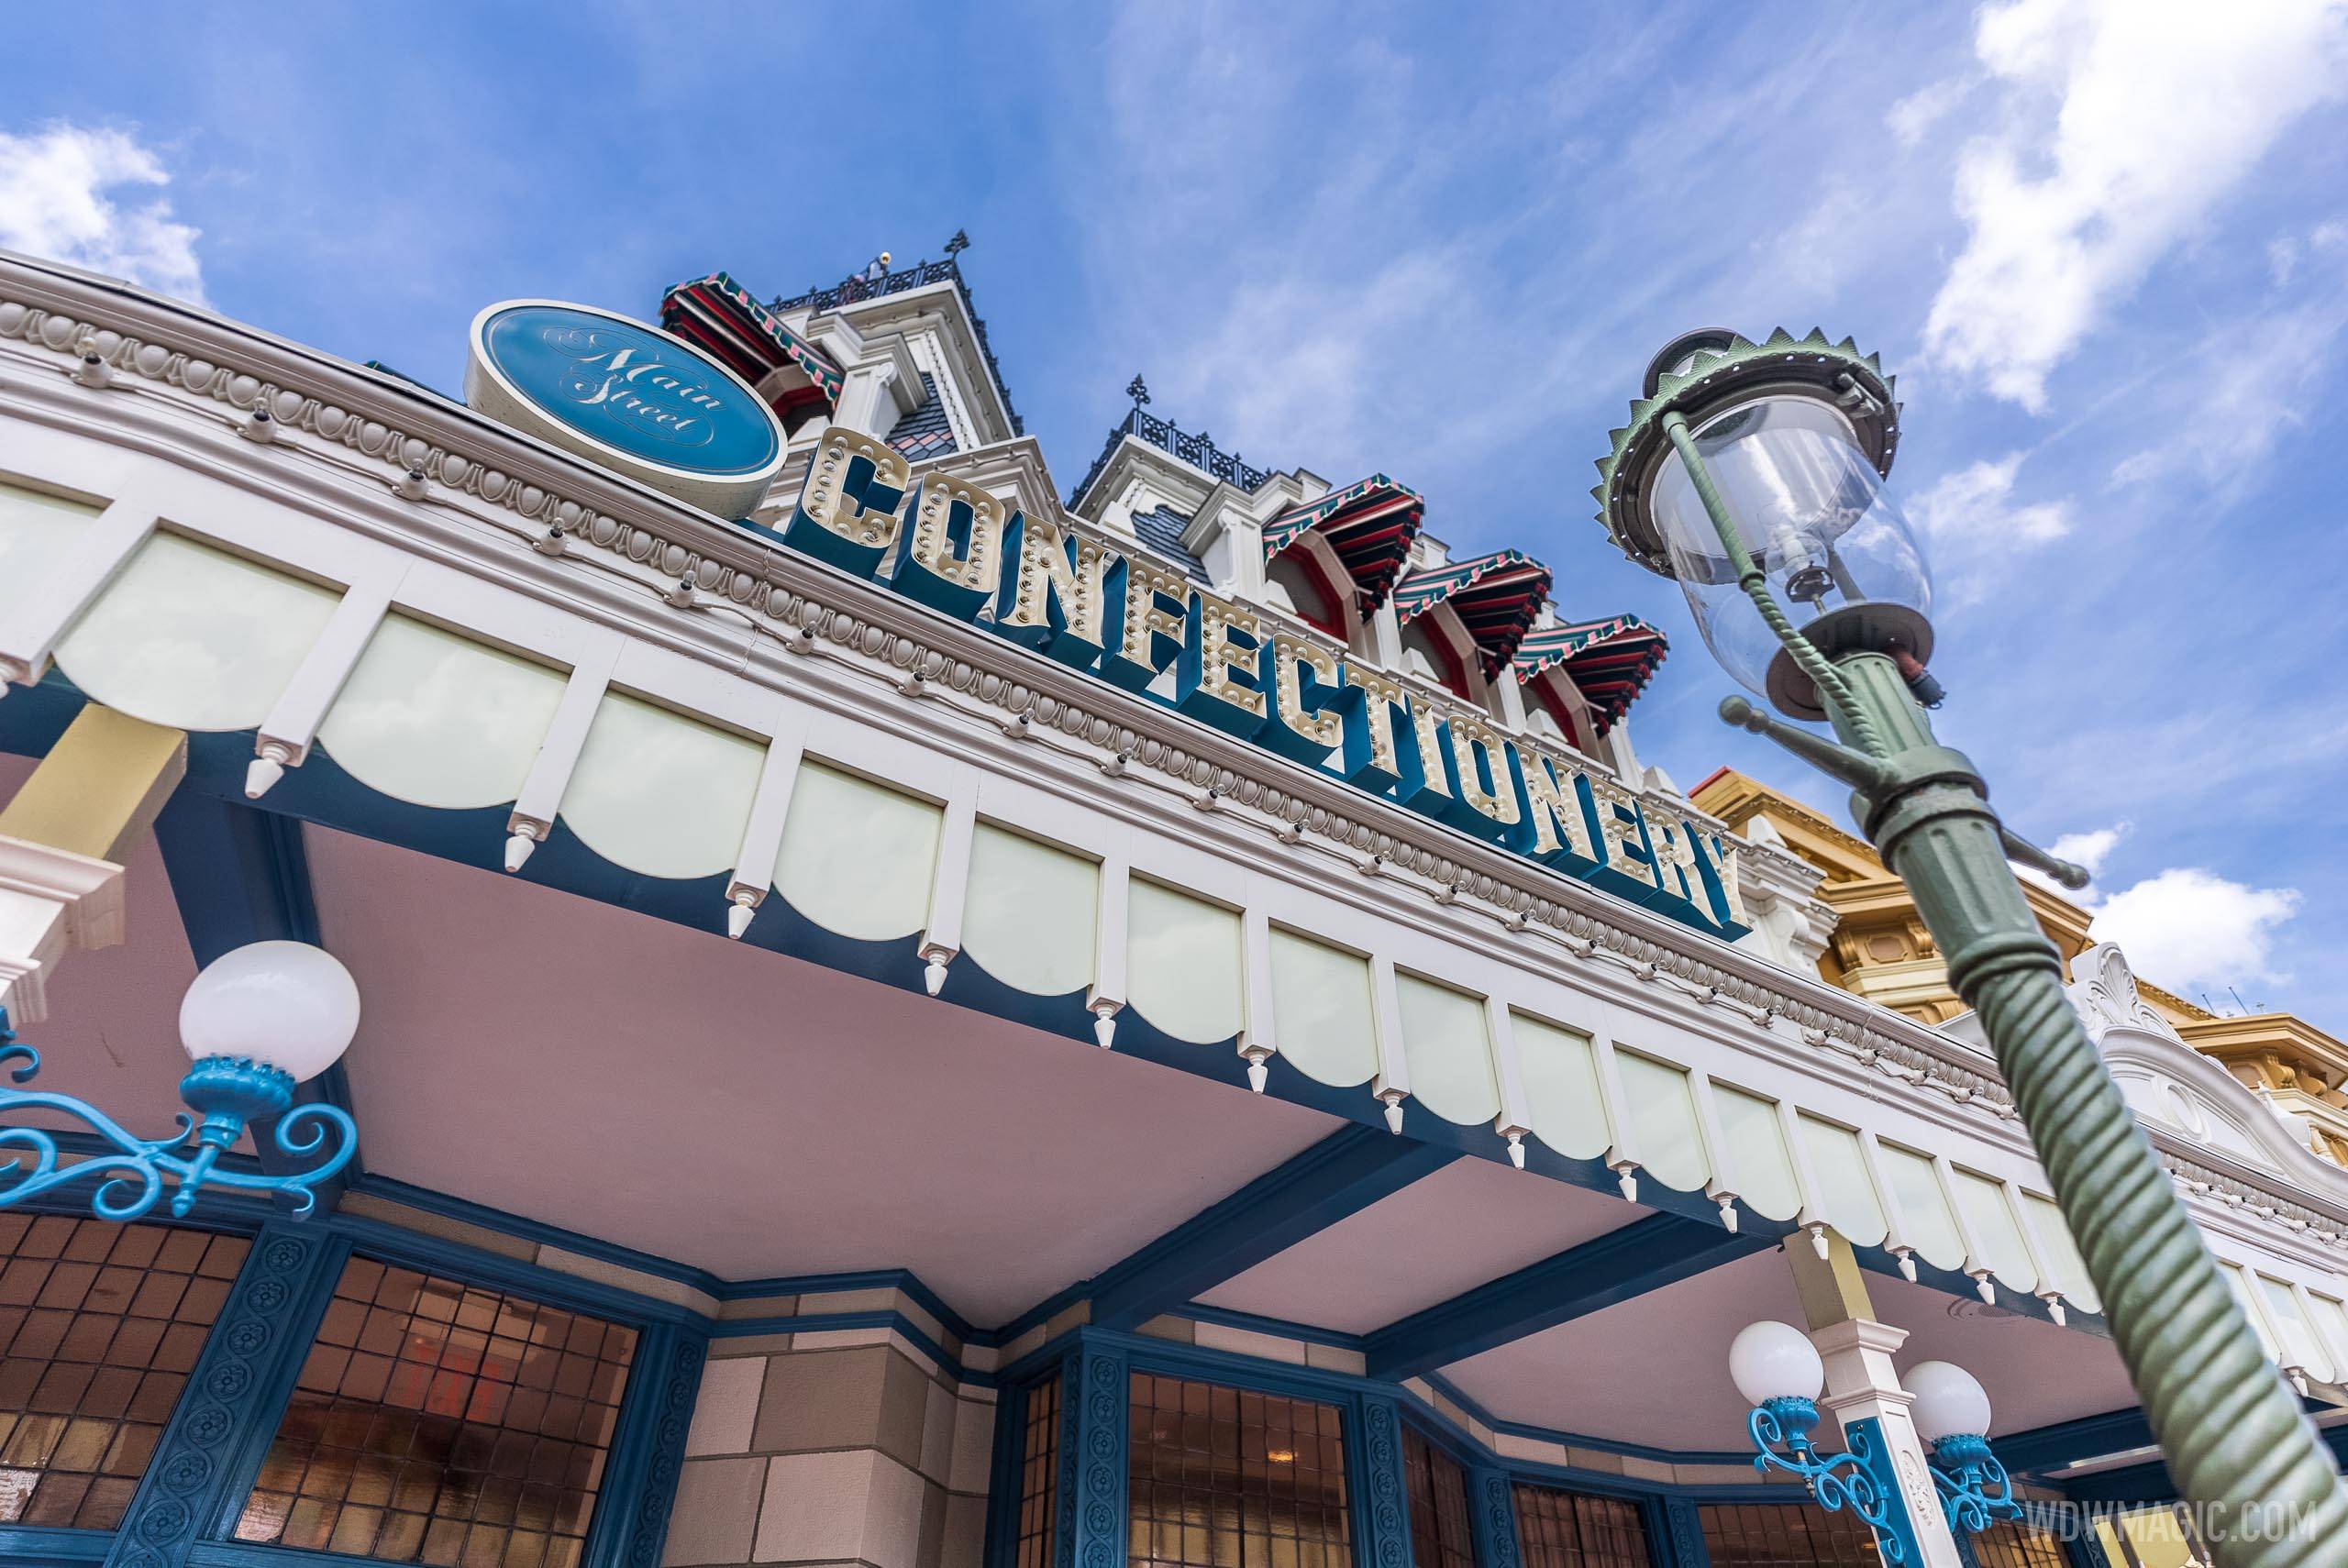 New look, more space and customized confection coming with the Main Street Confectionary refurbishment at Magic Kingdom